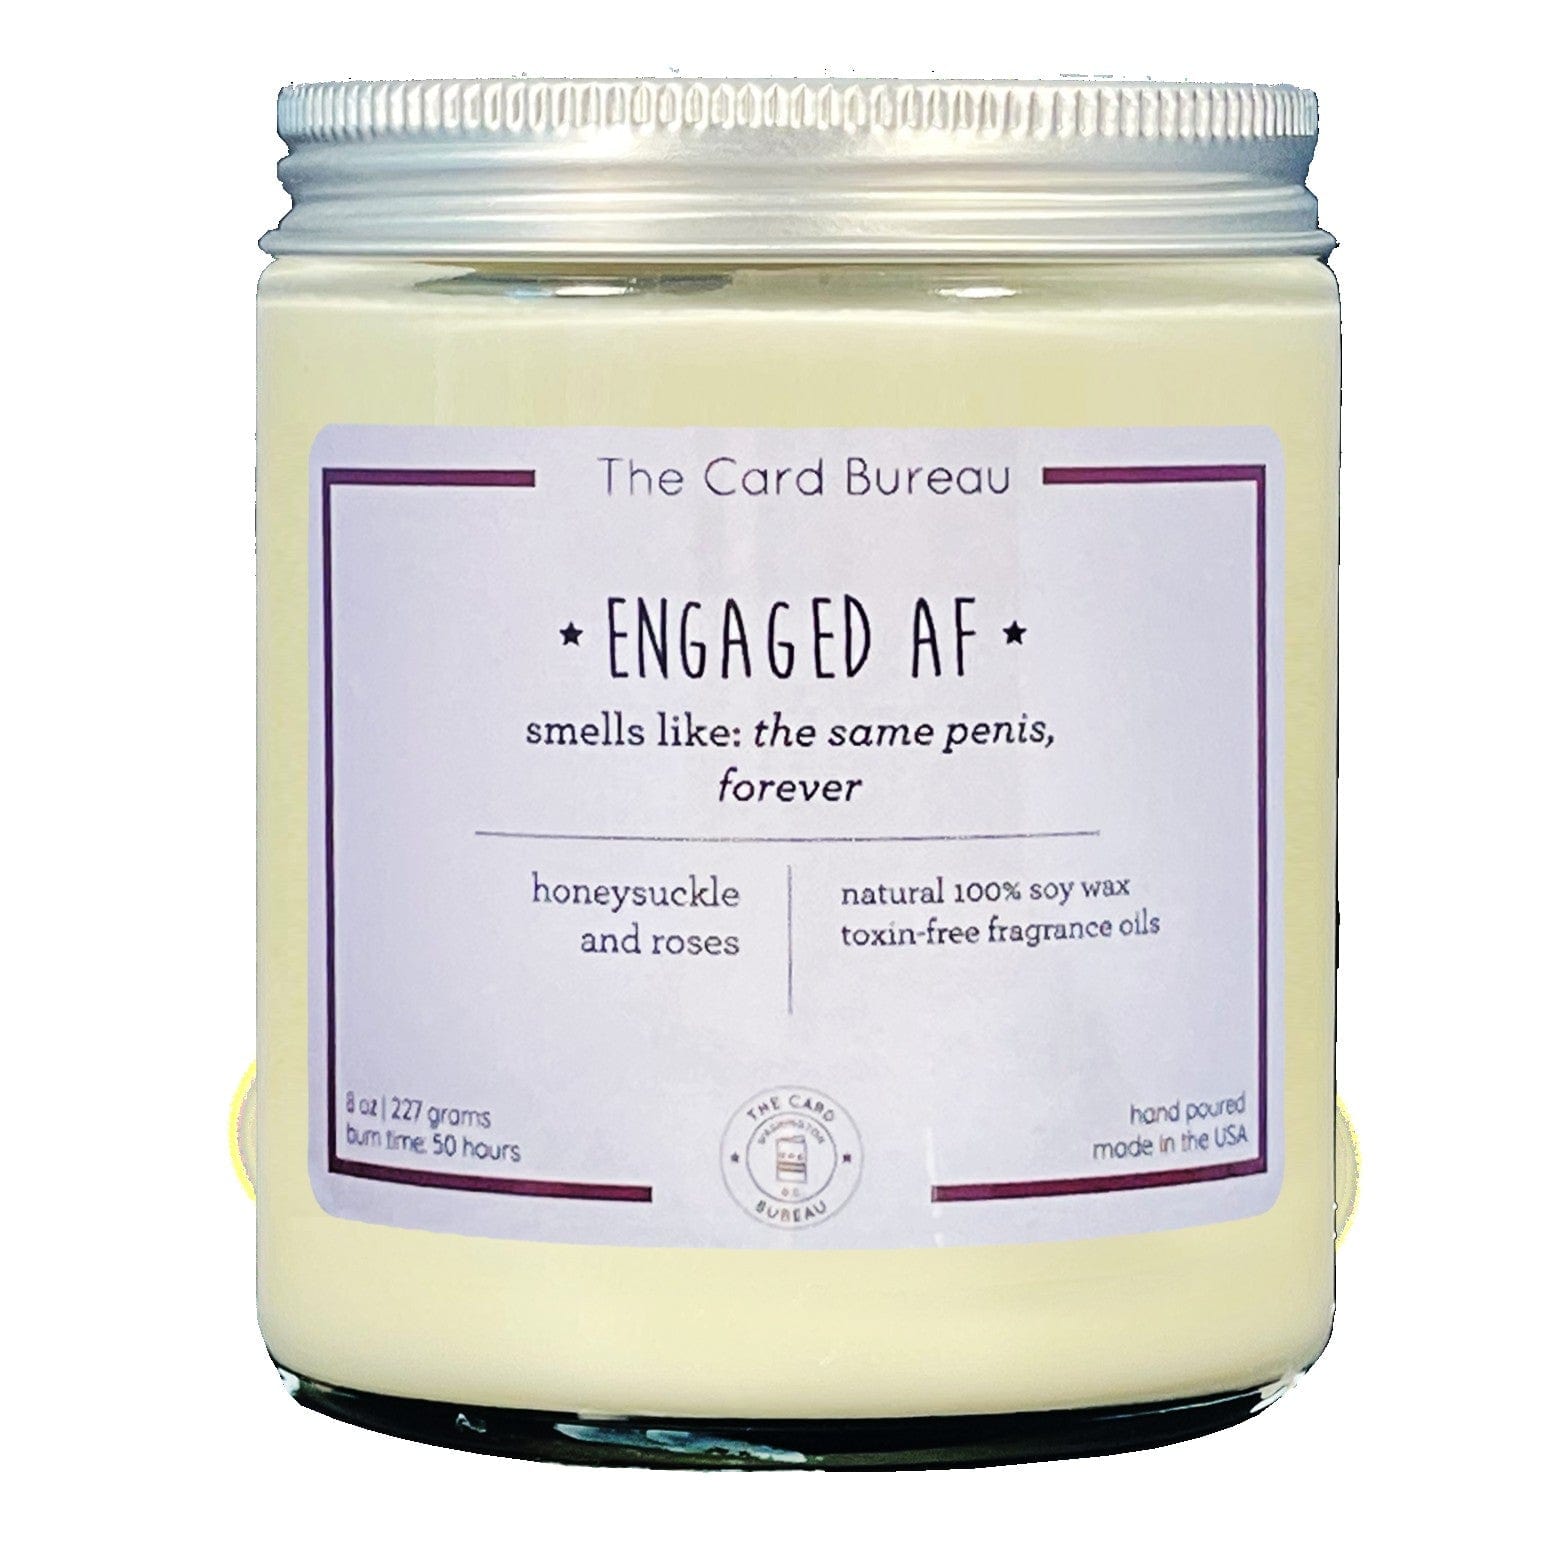 Engaged AF Candle Novelty 24.95 MPGD Corp Merchandise